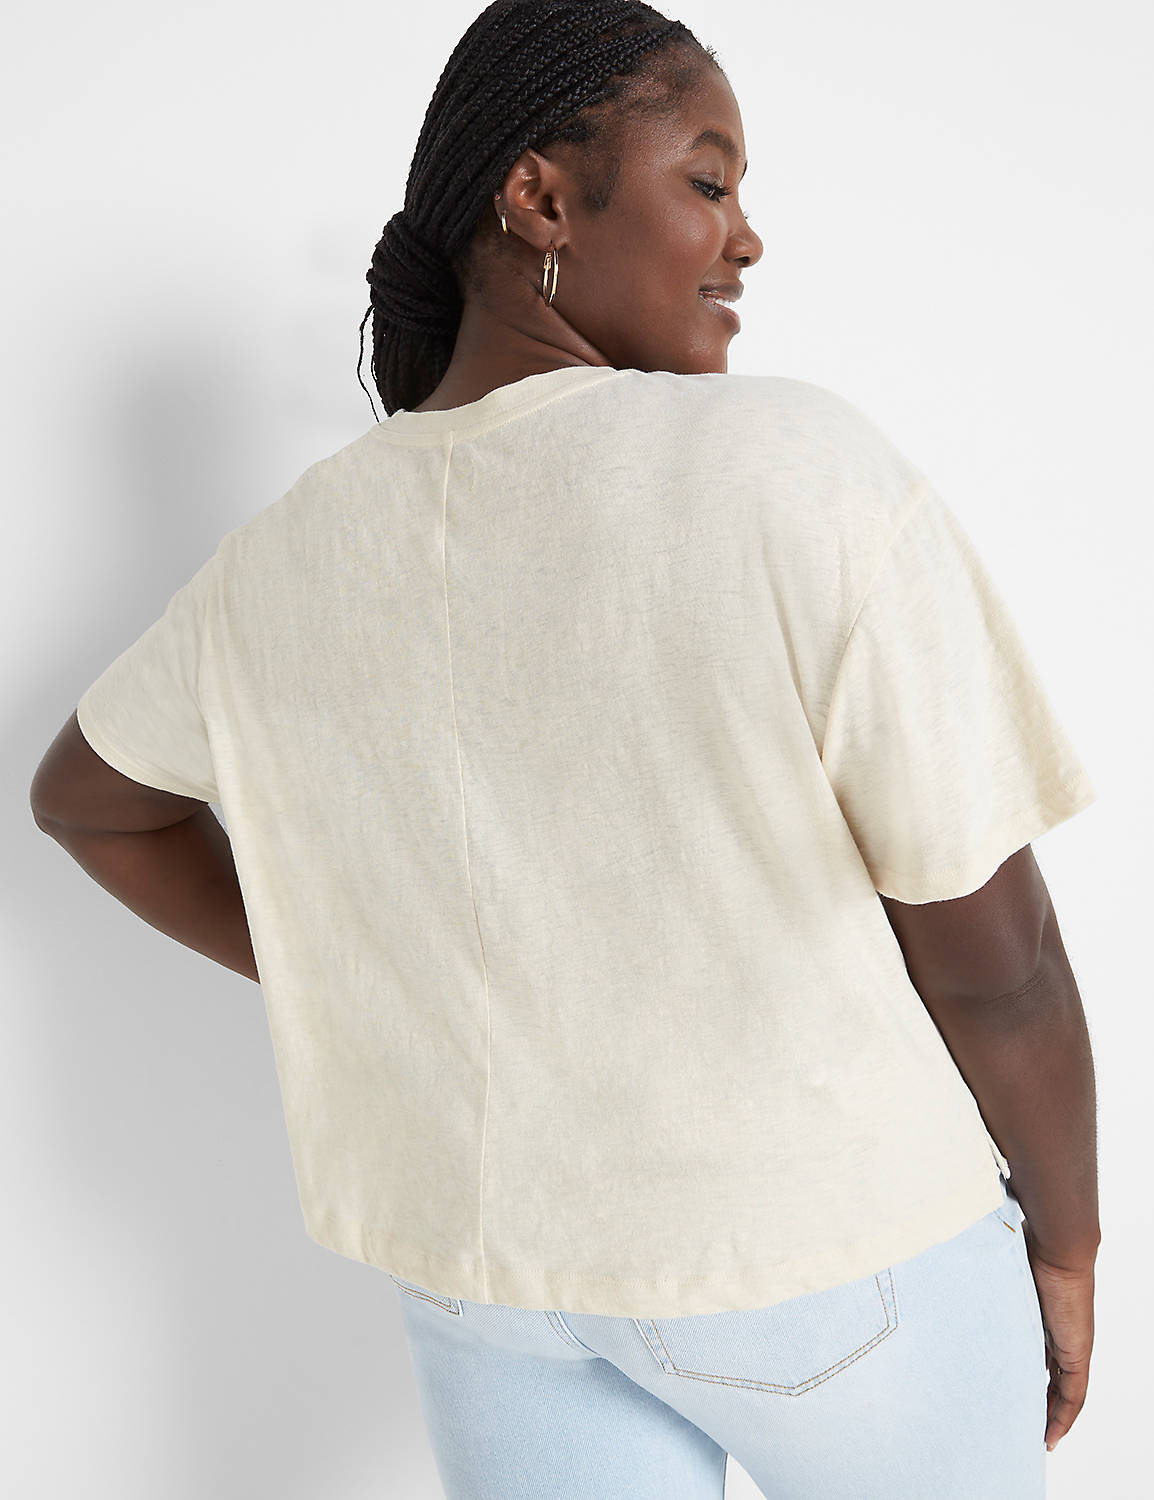 Relaxed Perfect Sleeve Open Crew Ne Product Image 2